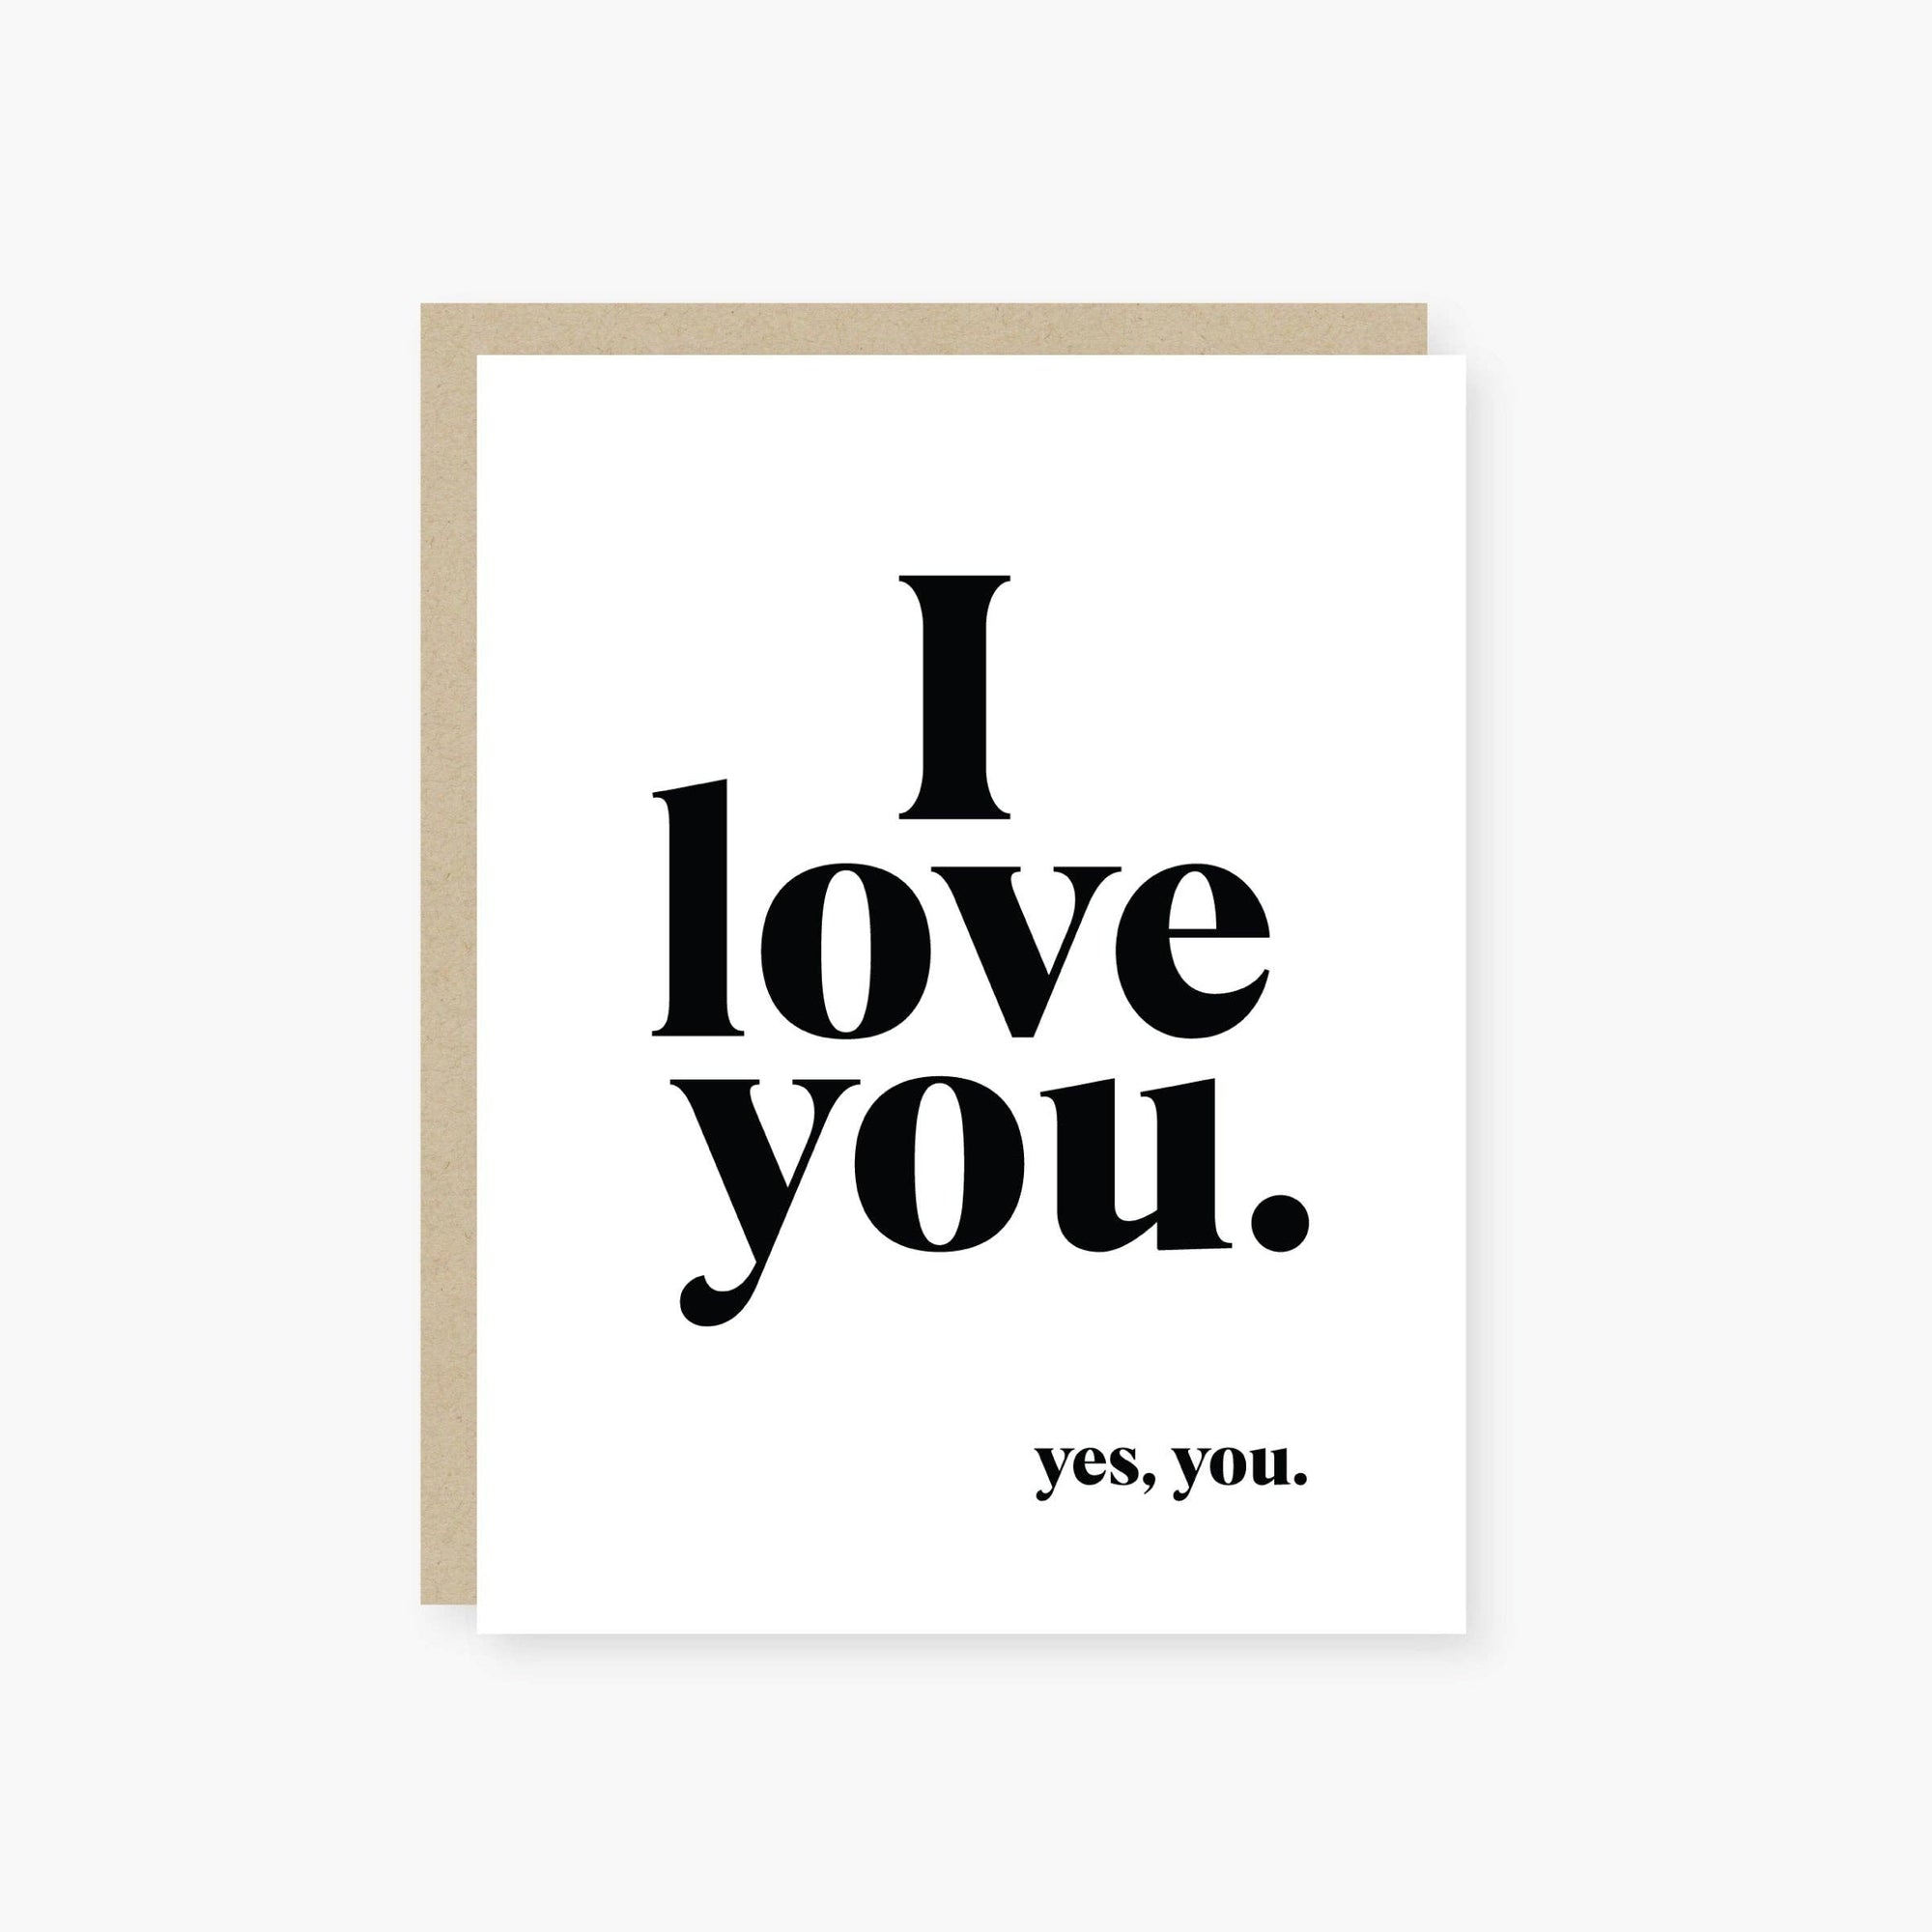 I love you, yes you encouragement, love card: Default